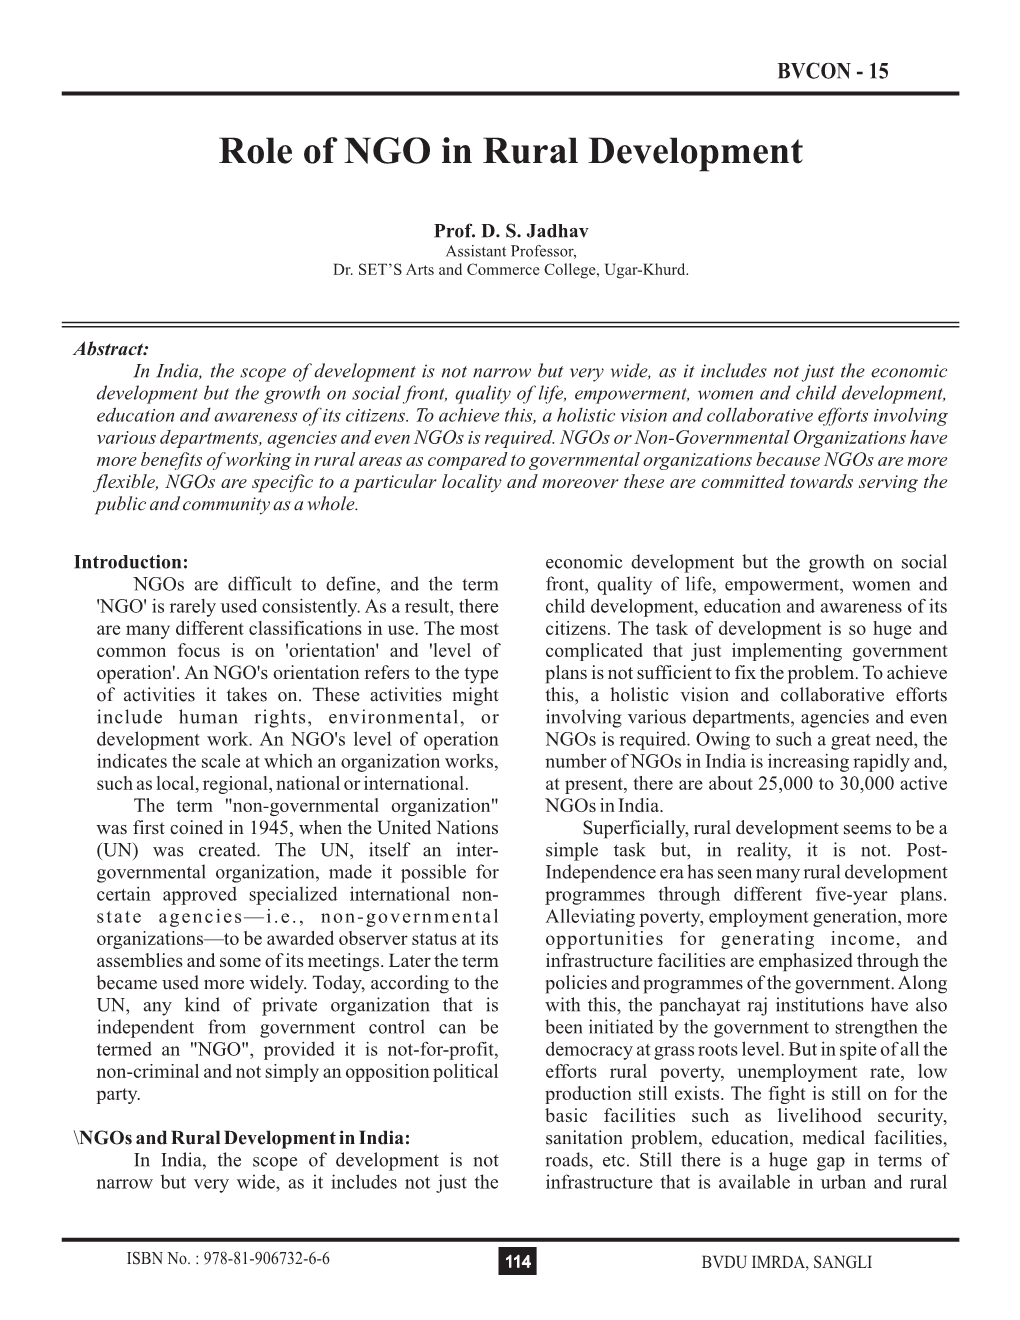 Role of NGO in Rural Development